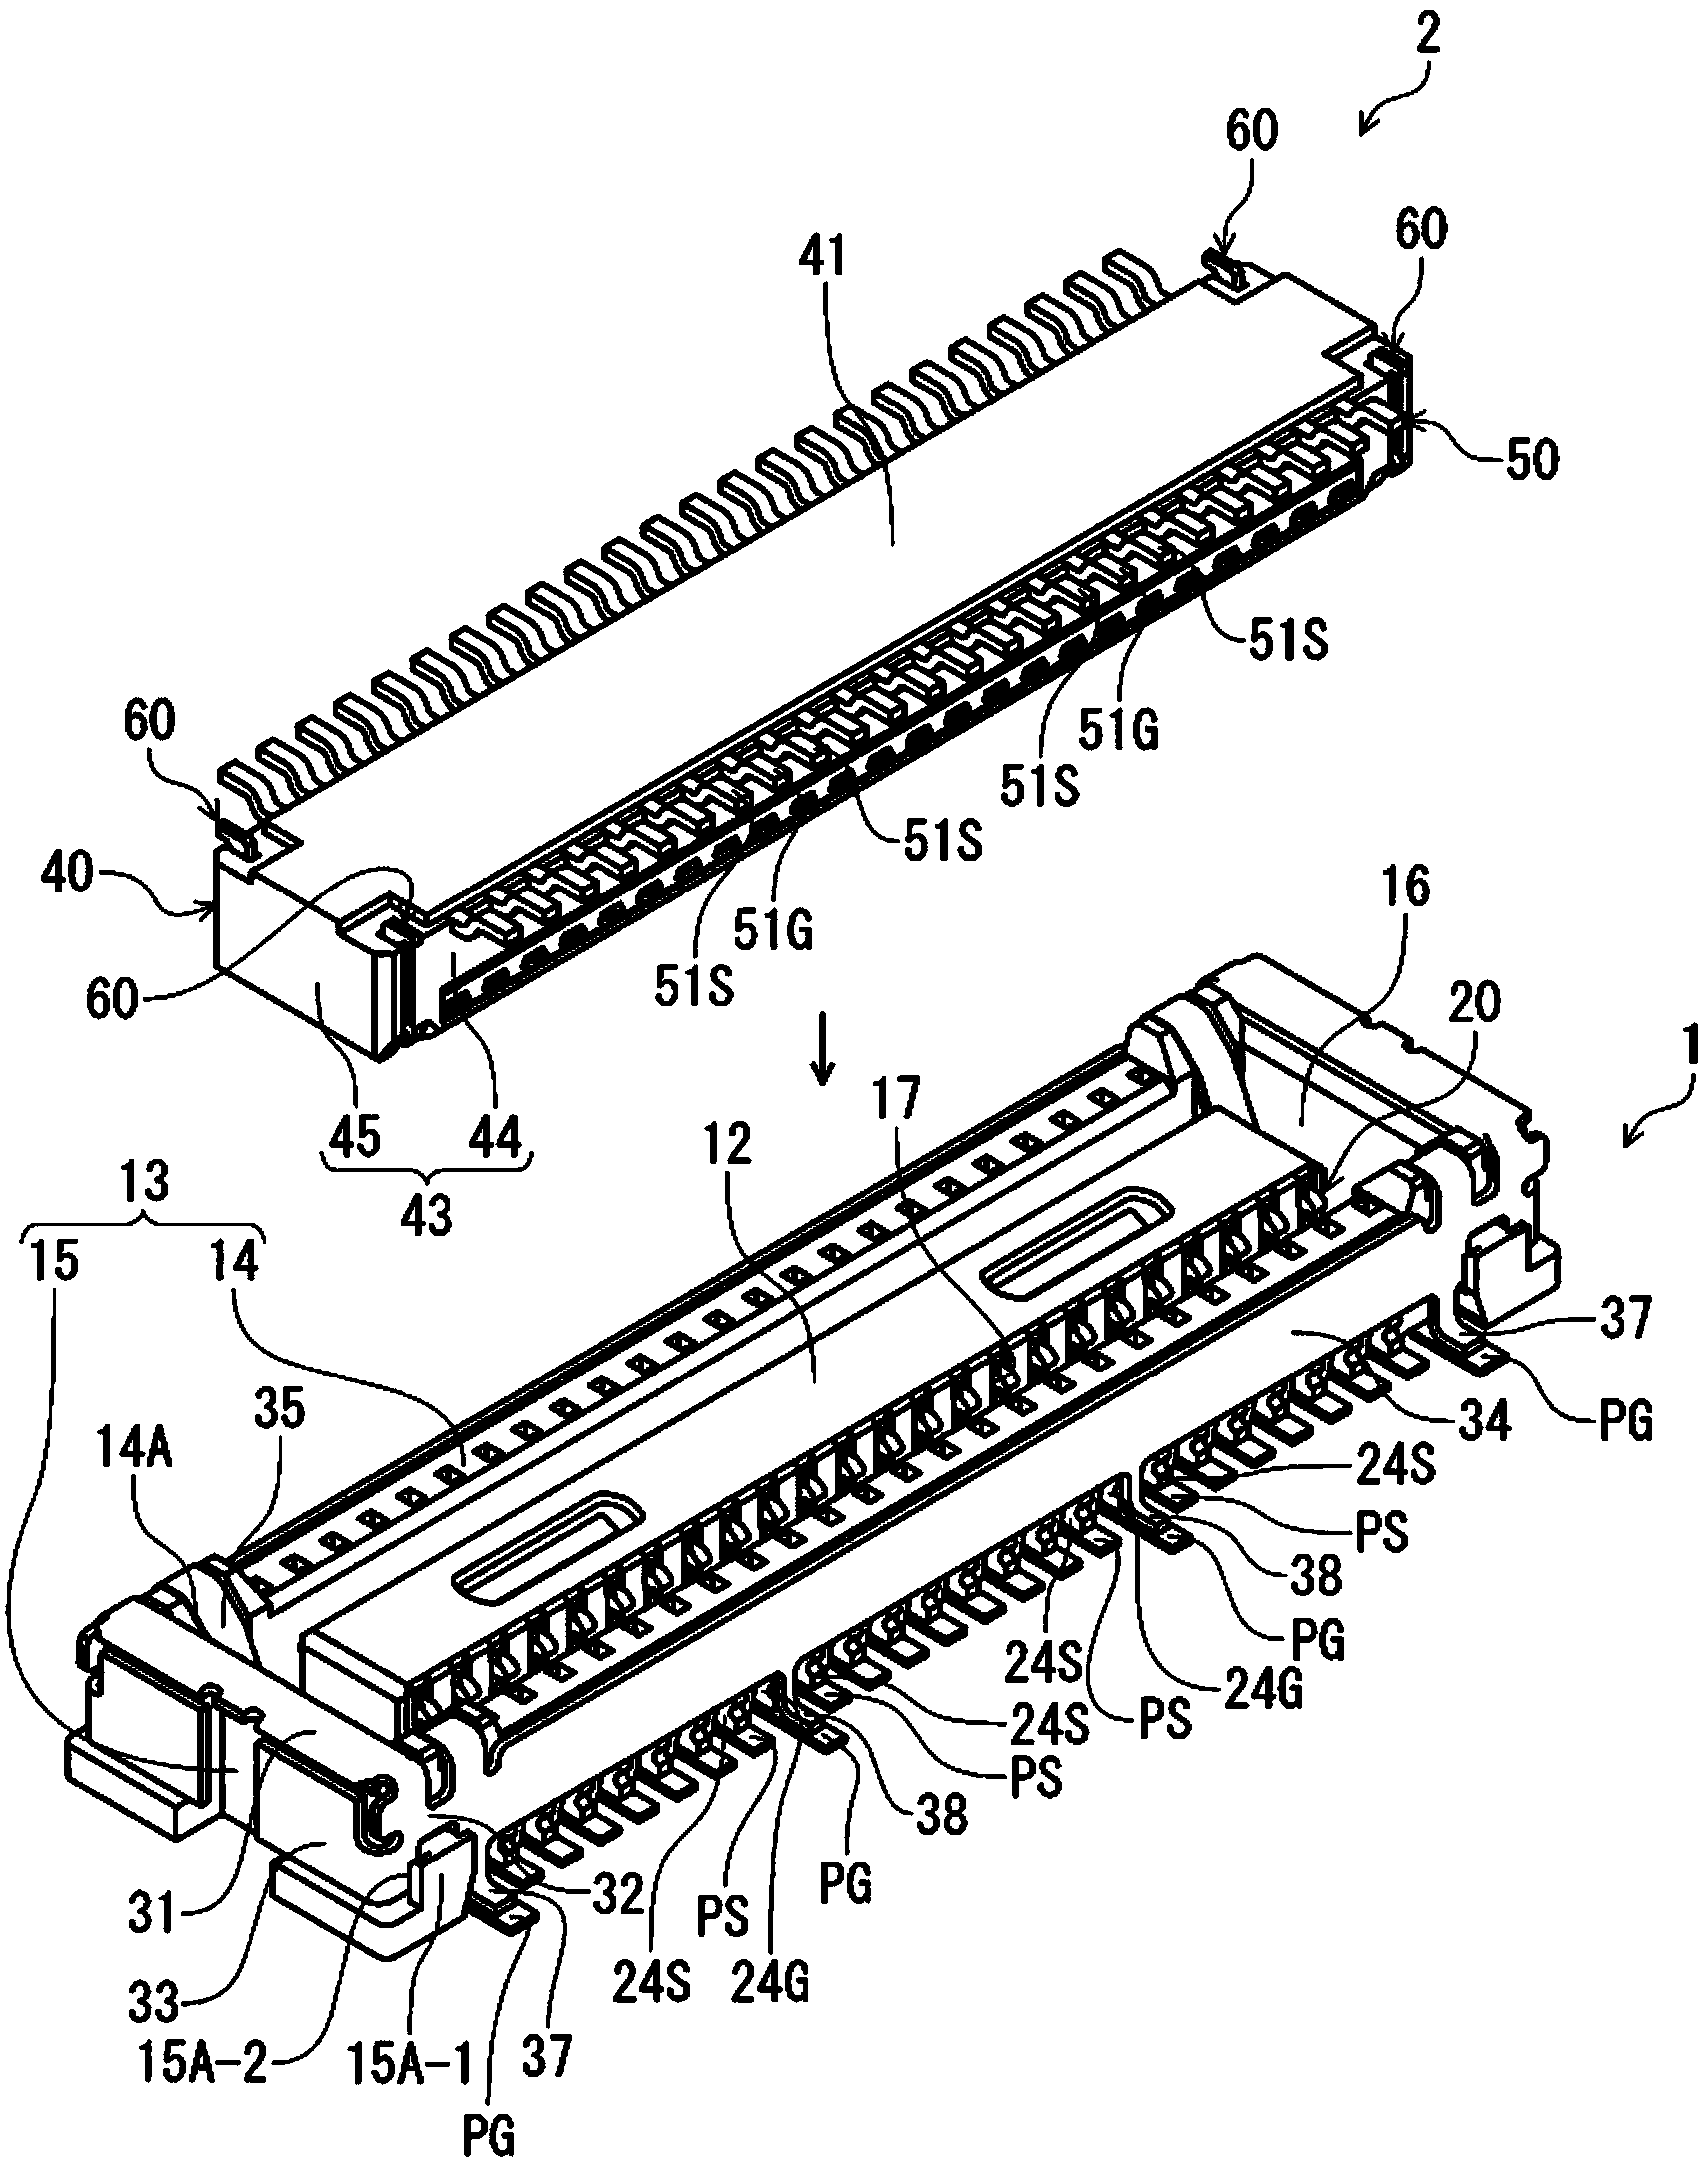 Electrical connector for circuit board and electrical connector installation body